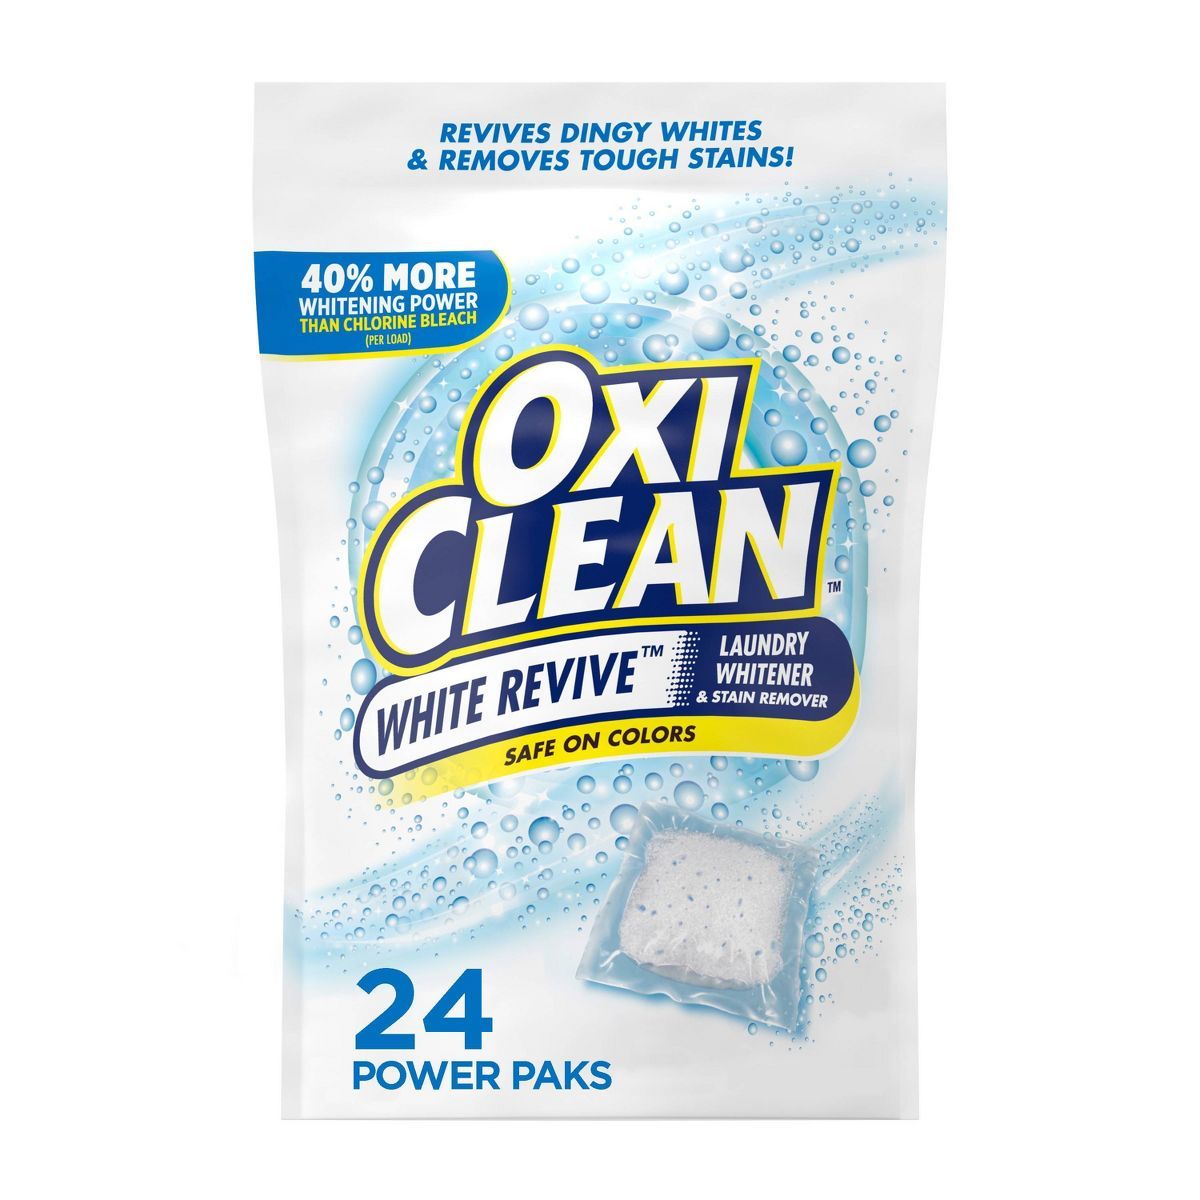 OxiClean White Revive Laundry Whitener + Stain Remover Power Paks - 24ct/21.1oz | Target